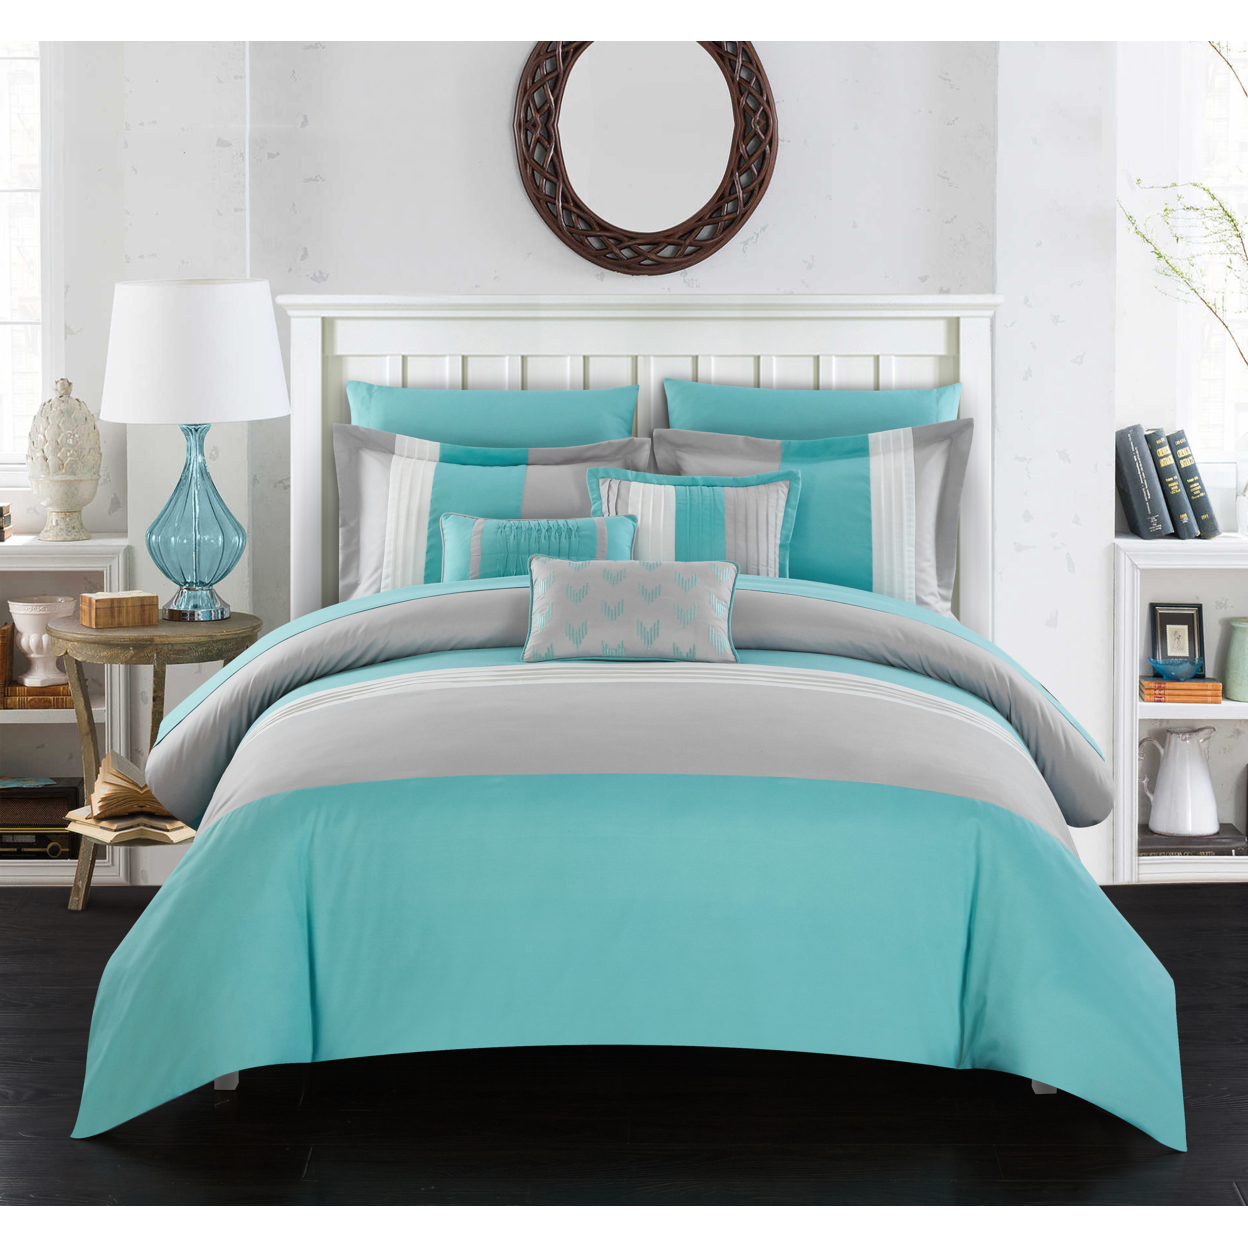 Rashi 10 Or 8 Piece Color Block Bed In A Bag Bedding And Comforter Set - Turquoise, King